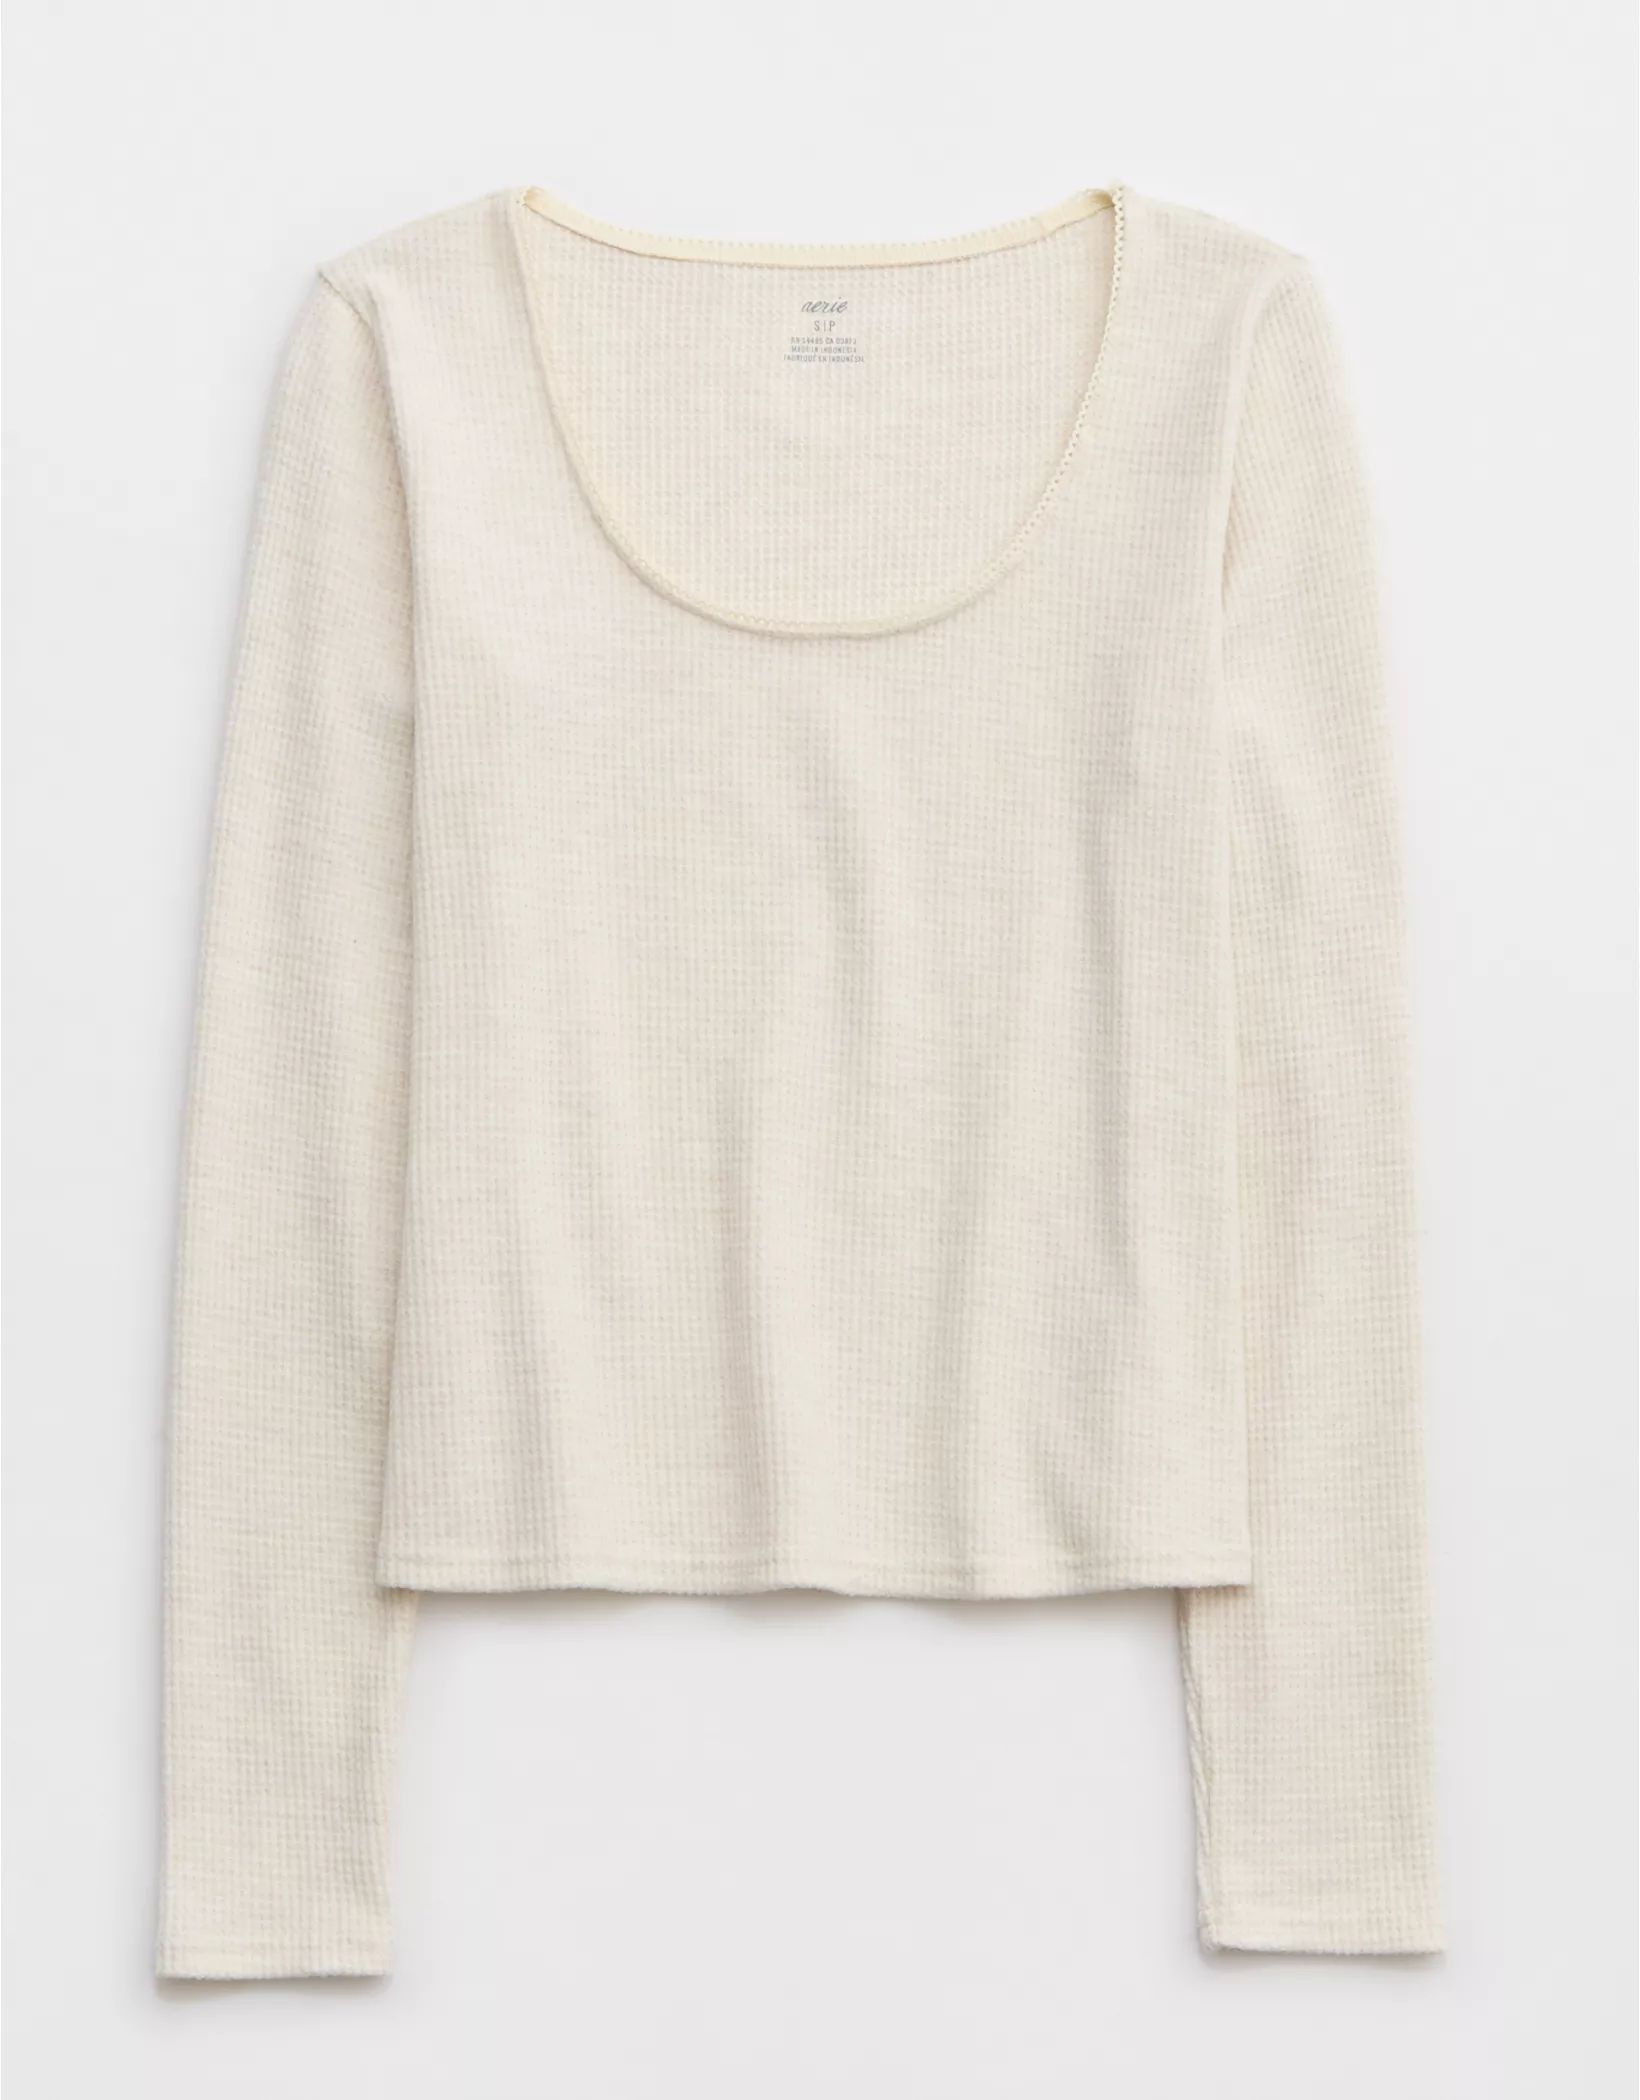 Aerie Waffle Scoop Neck Top | Aerie